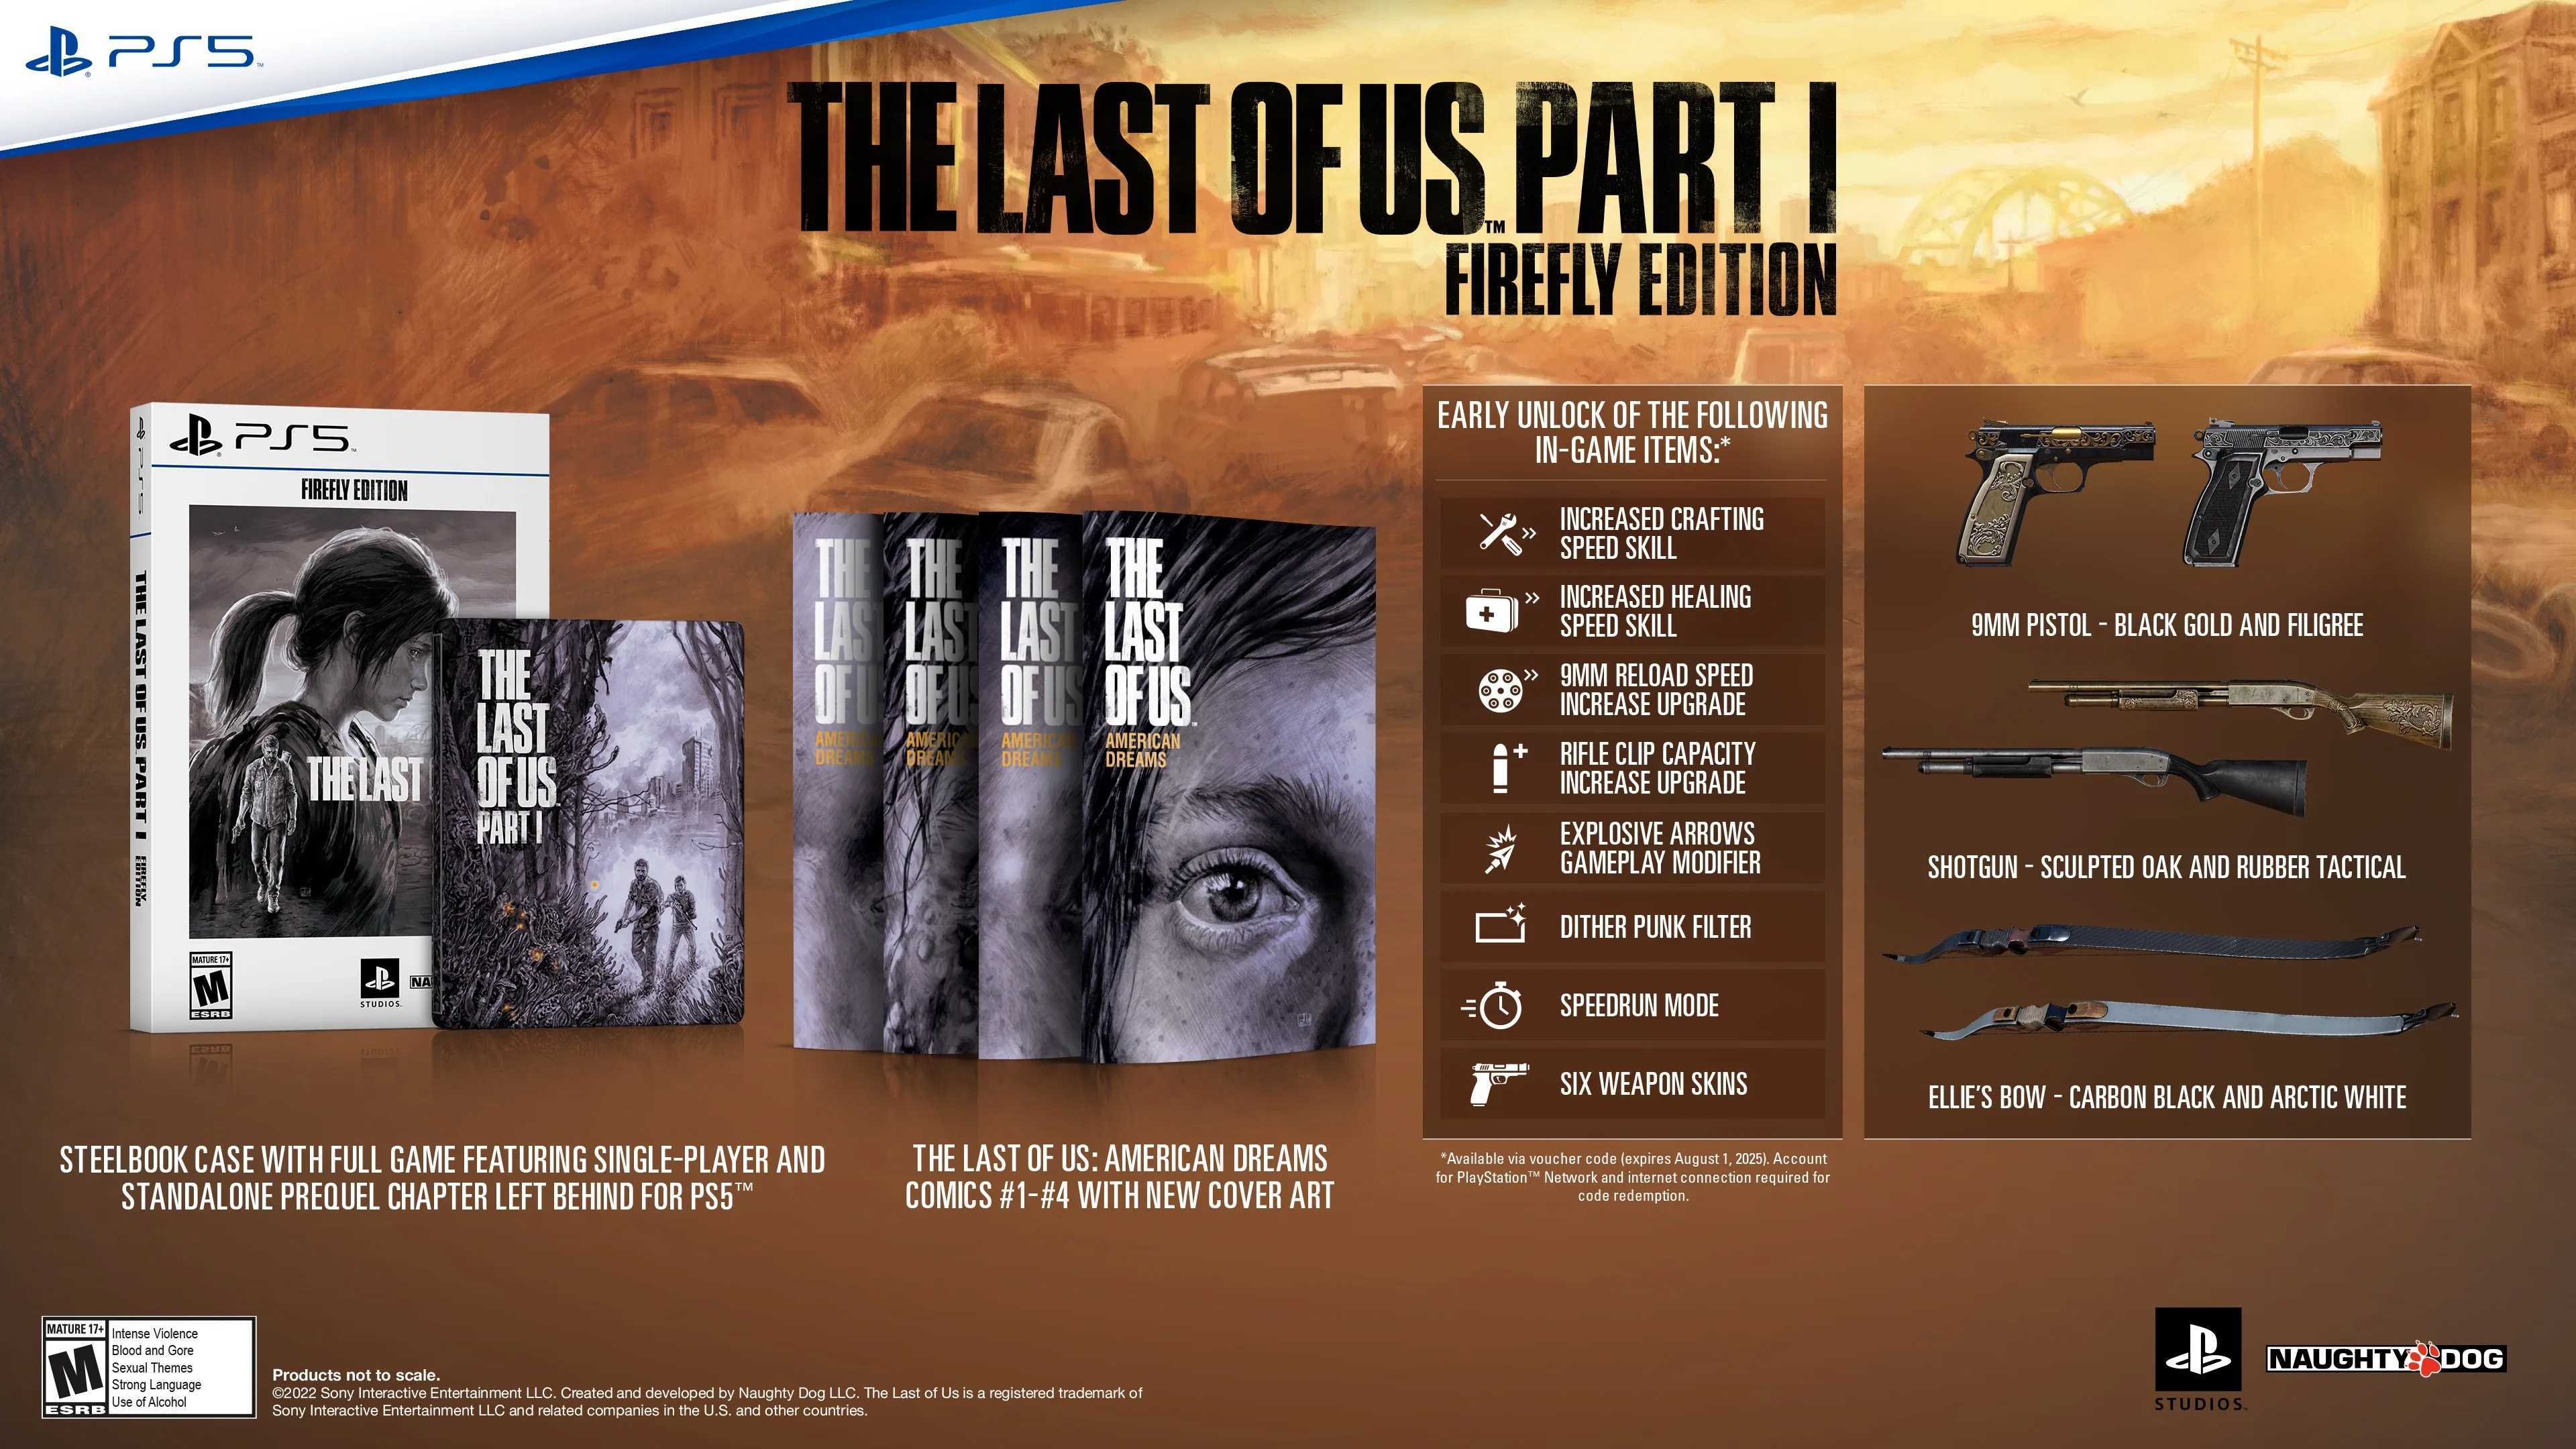 Last of us part 1 ps5. The last of us PLAYSTATION 5. The last of us ремейк ps5. The last of us 1 ps5. The last of us ps5 диск.